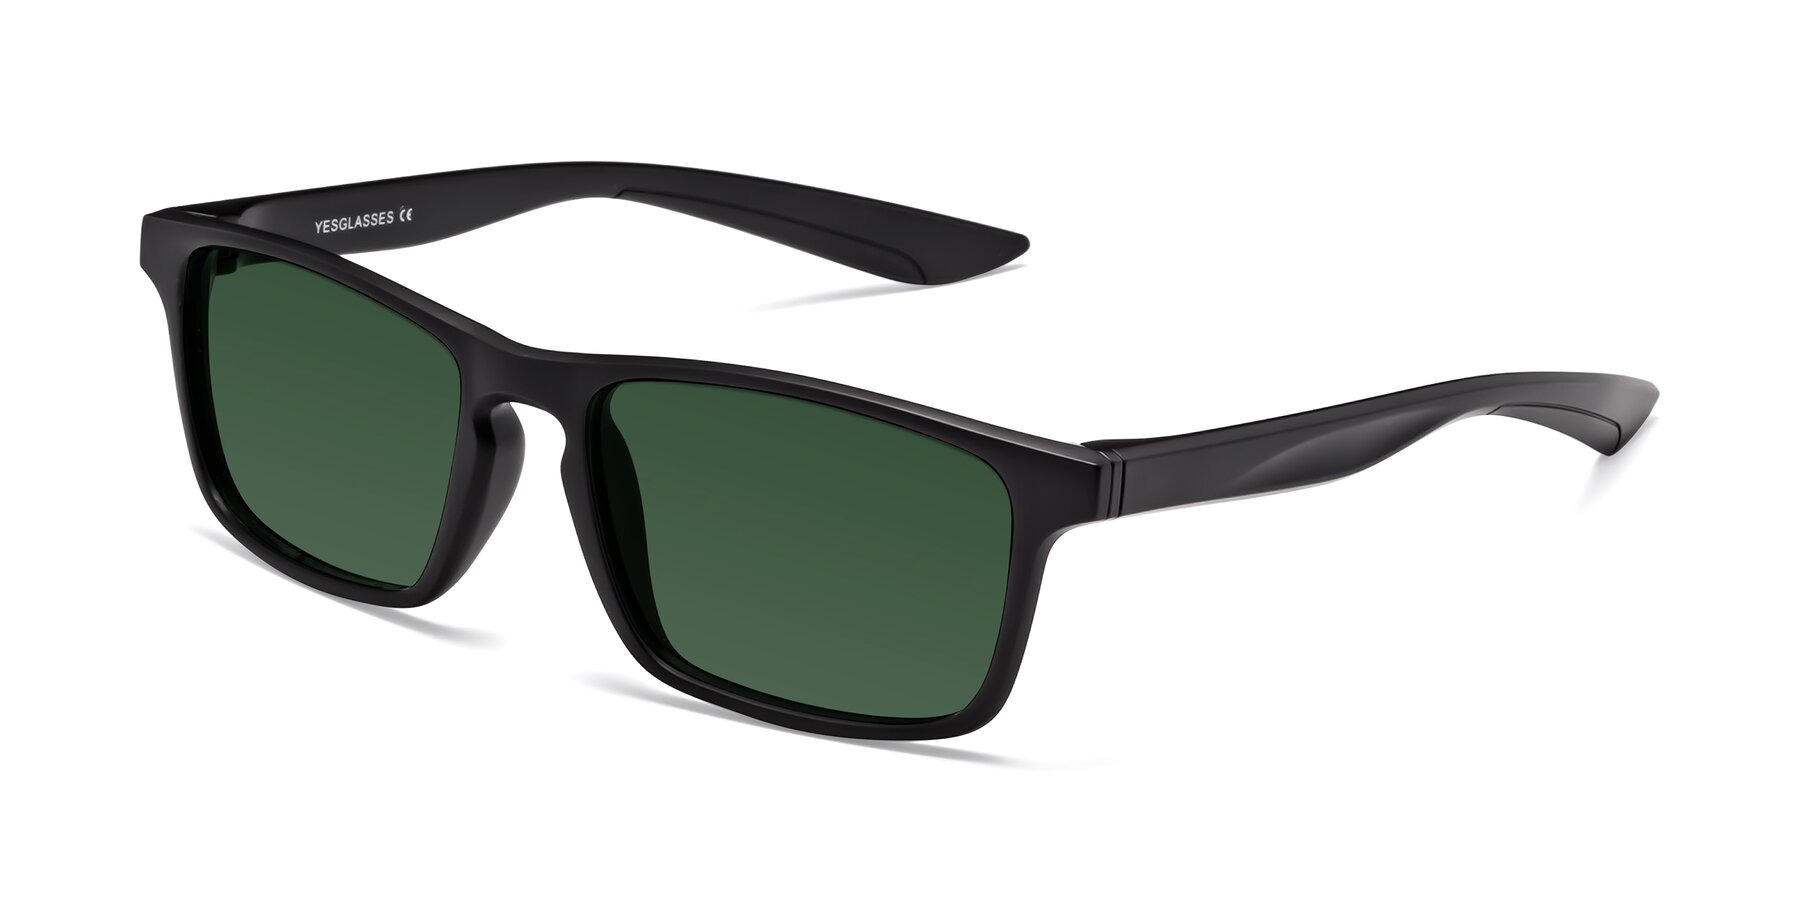 Angle of Passion in Matte Black with Green Tinted Lenses